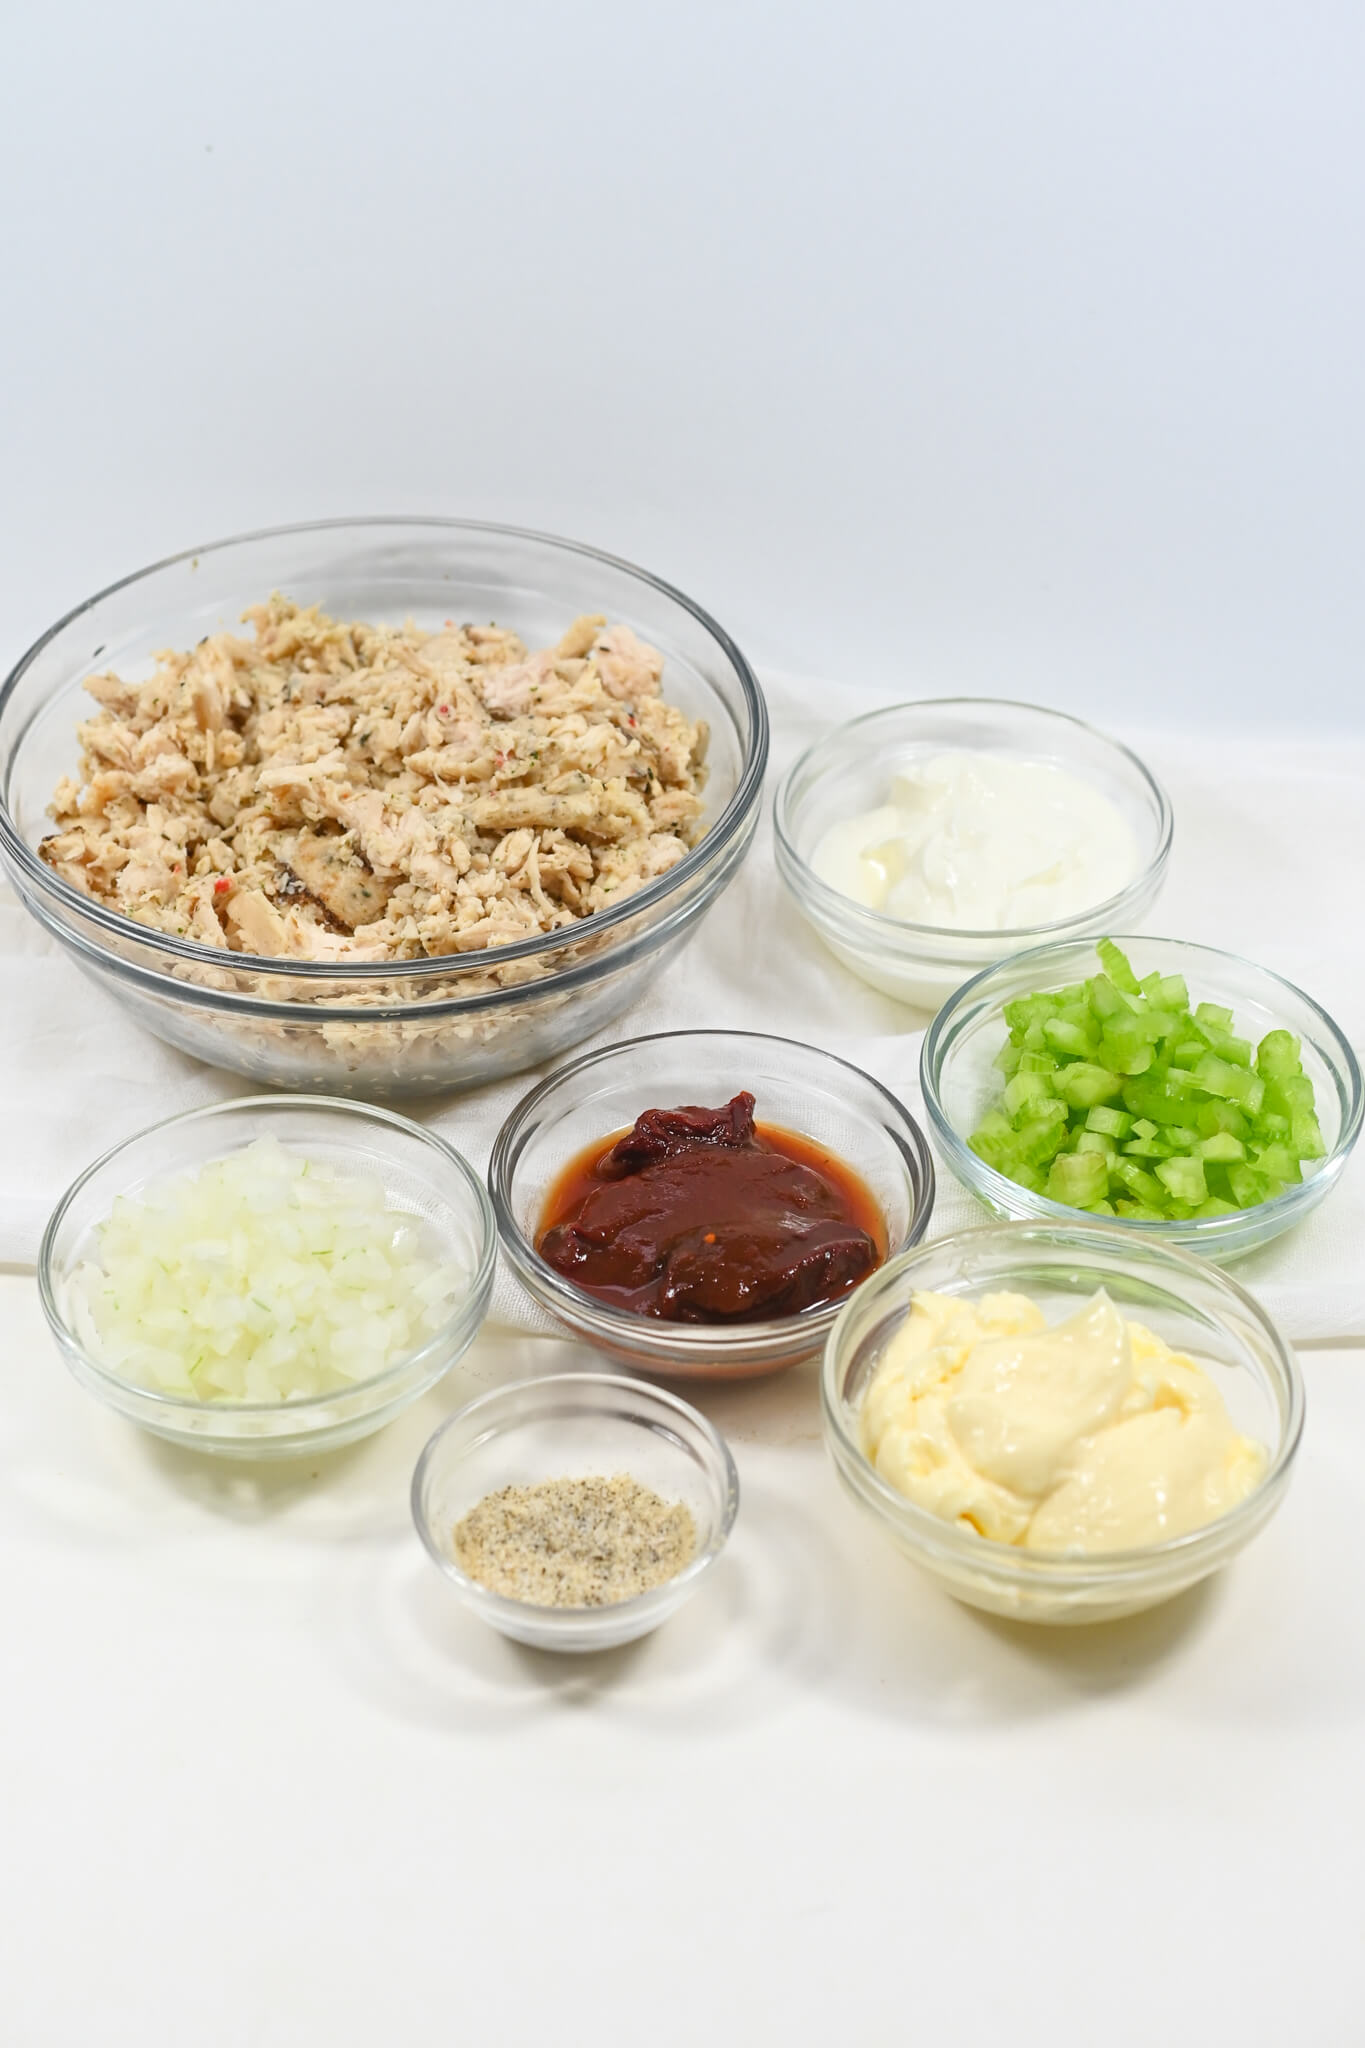 Ingredients for making a chipotle chicken salad neatly arranged in clear bowls on a white background.